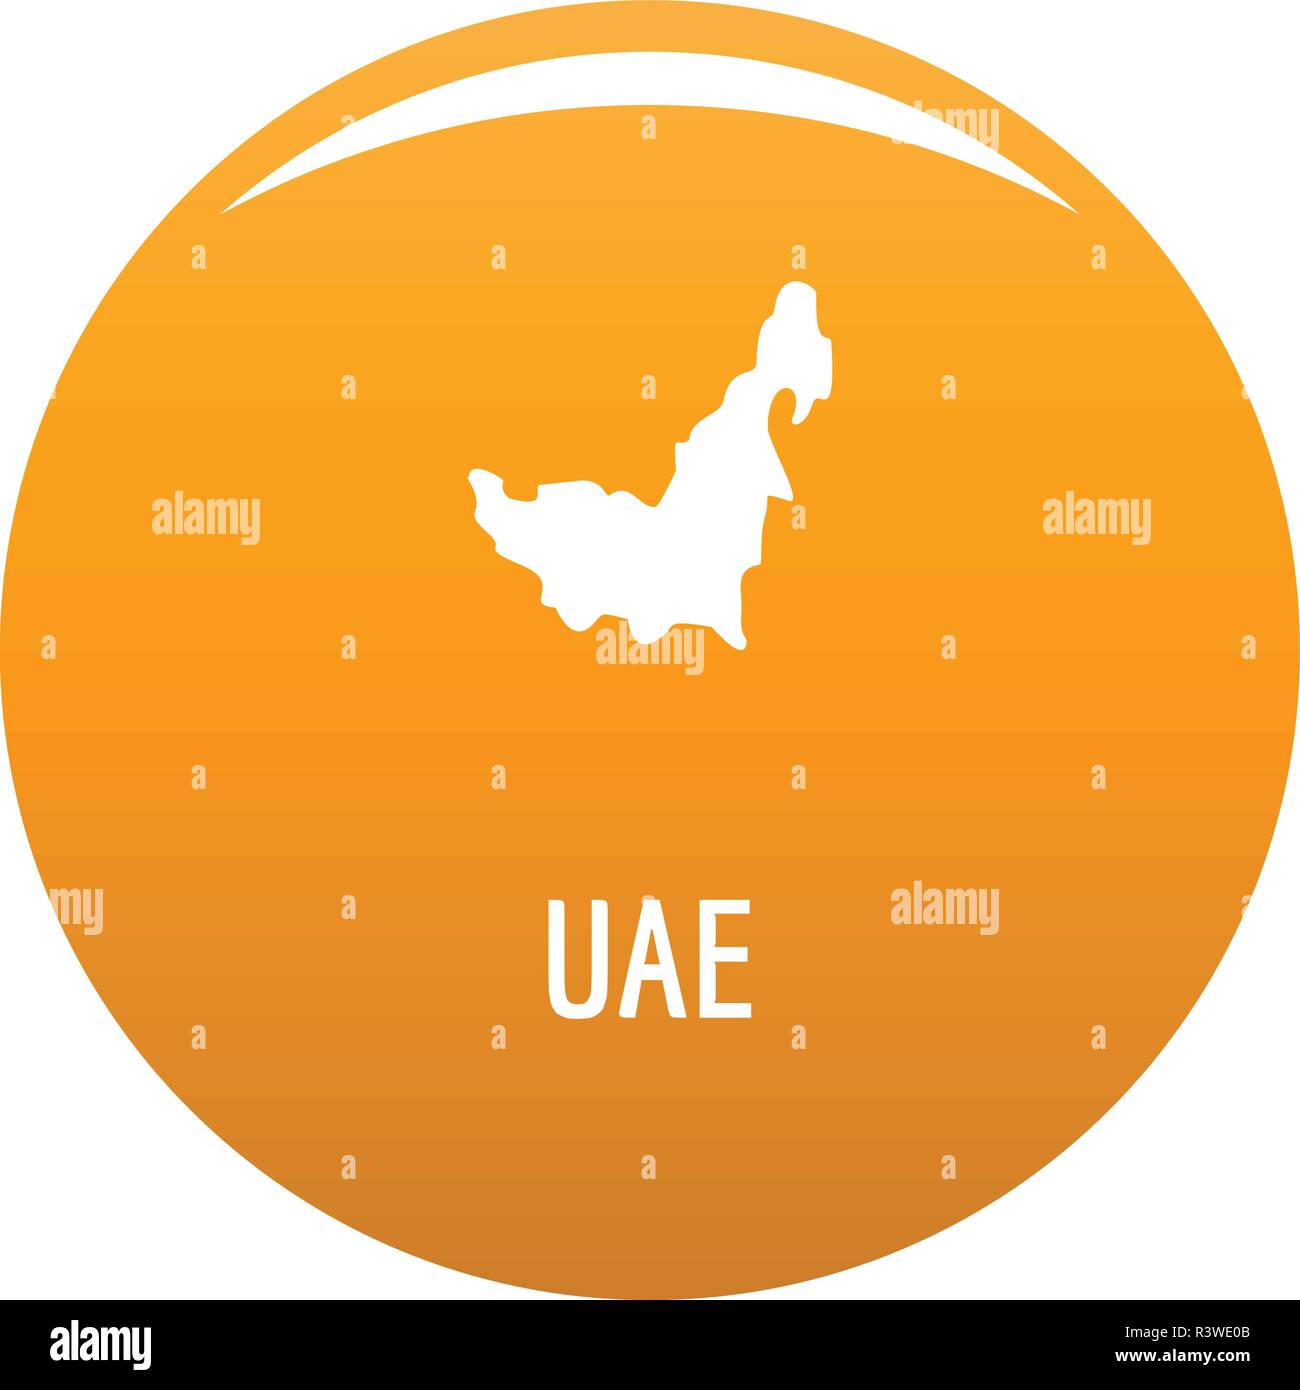 UAE map in black. Simple illustration of UAE map vector isolated on white background Stock Vector